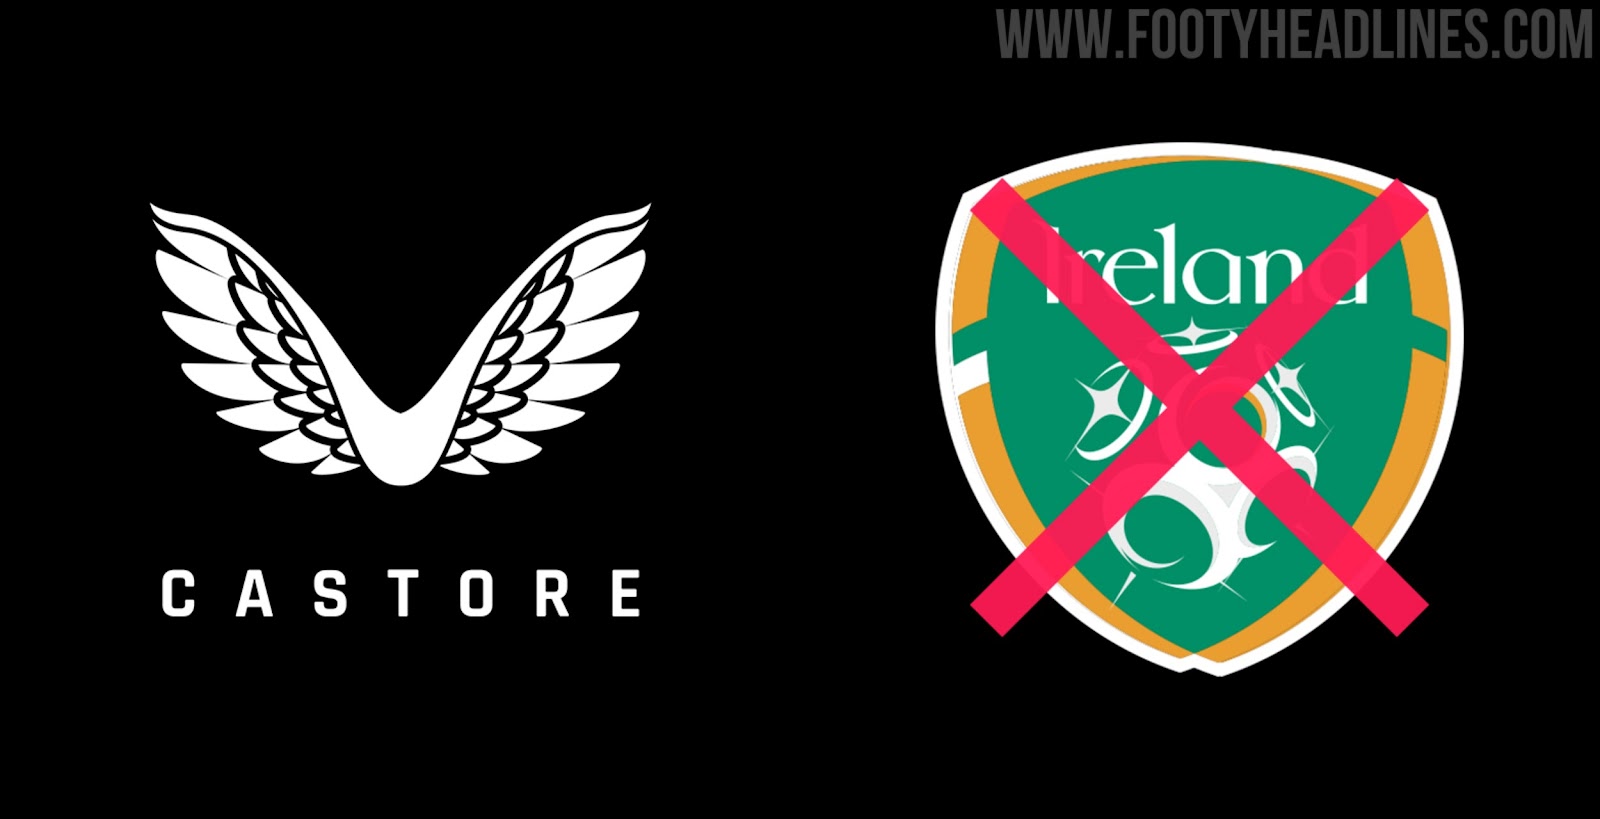 New GAA jersey centres on Kerry crest and drops 'Group' from sponsor's logo